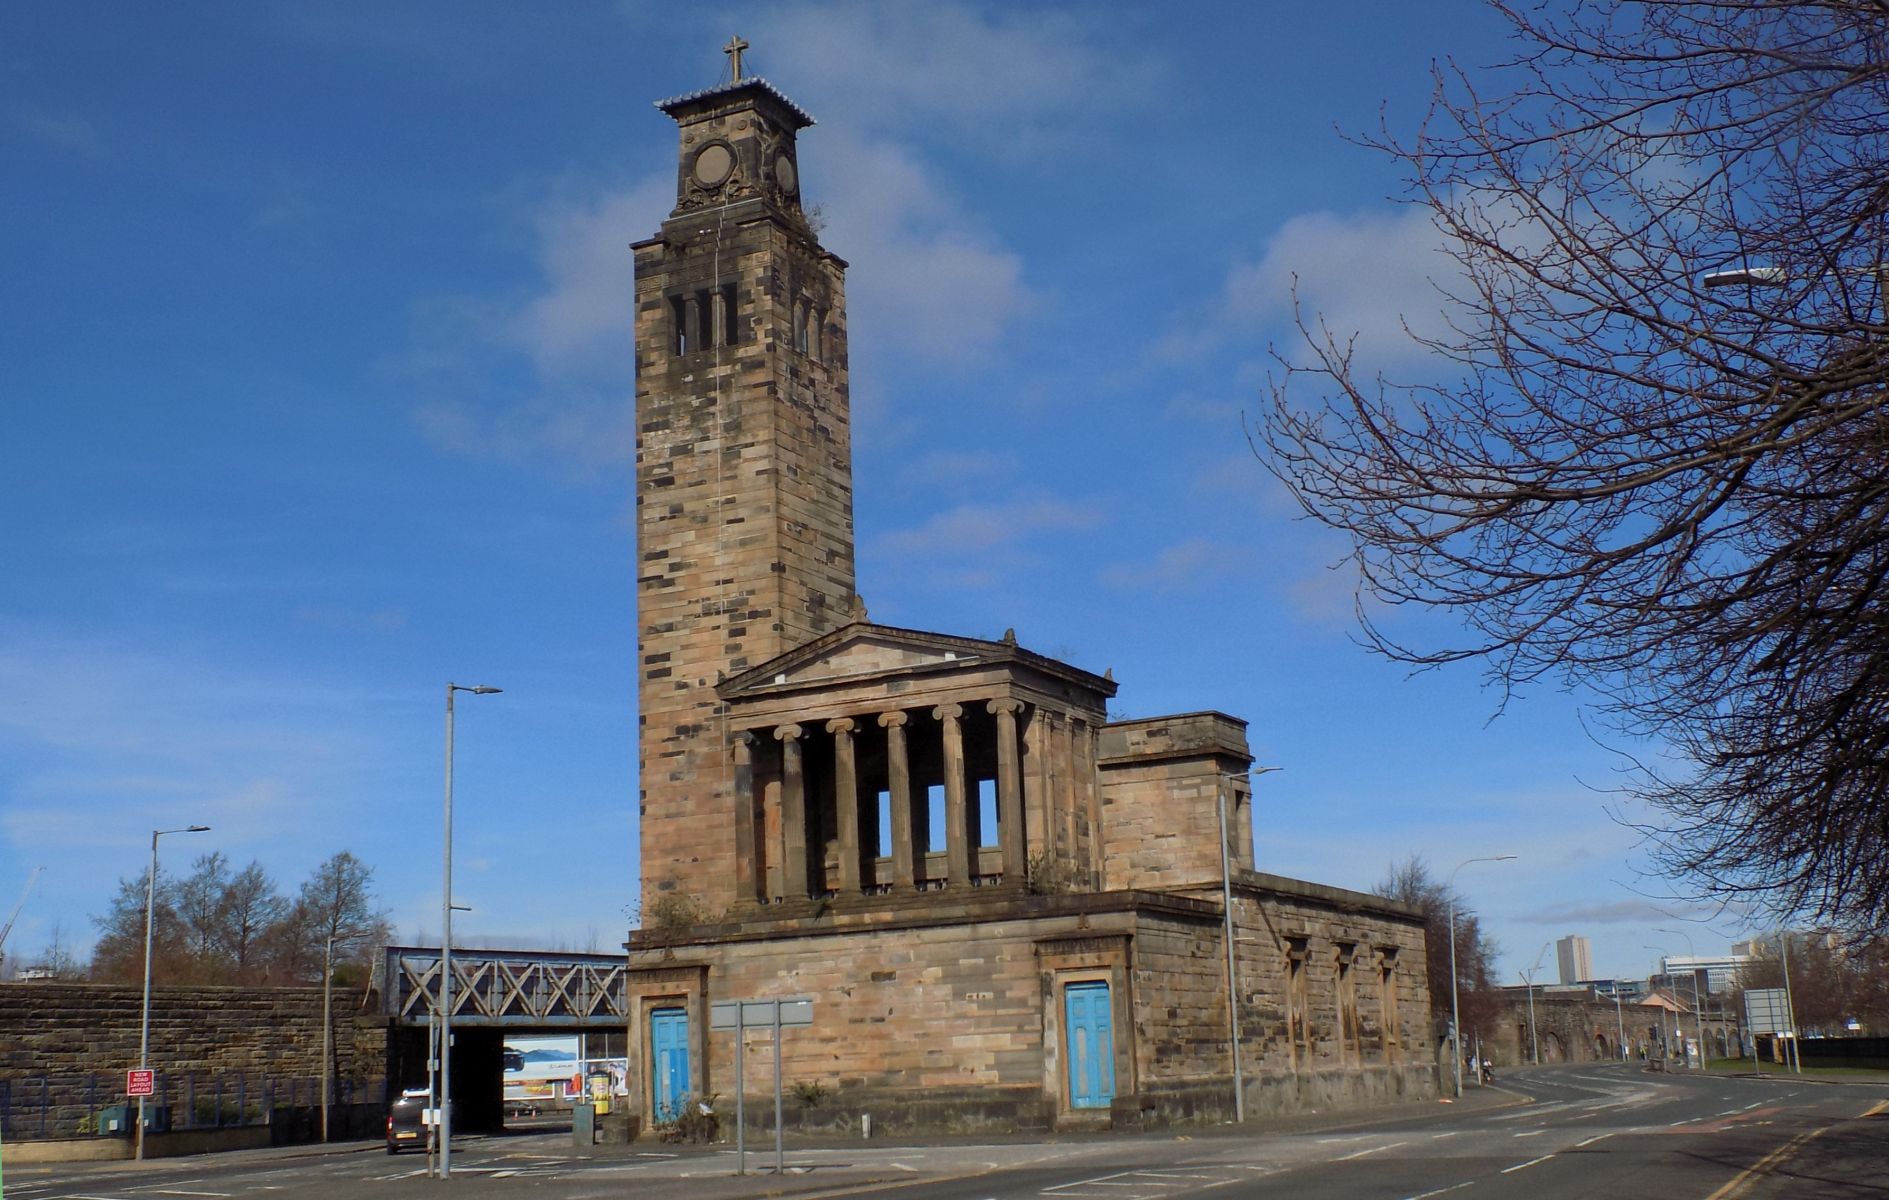 Caledonia Road Church in the Gorbals, Glasgow